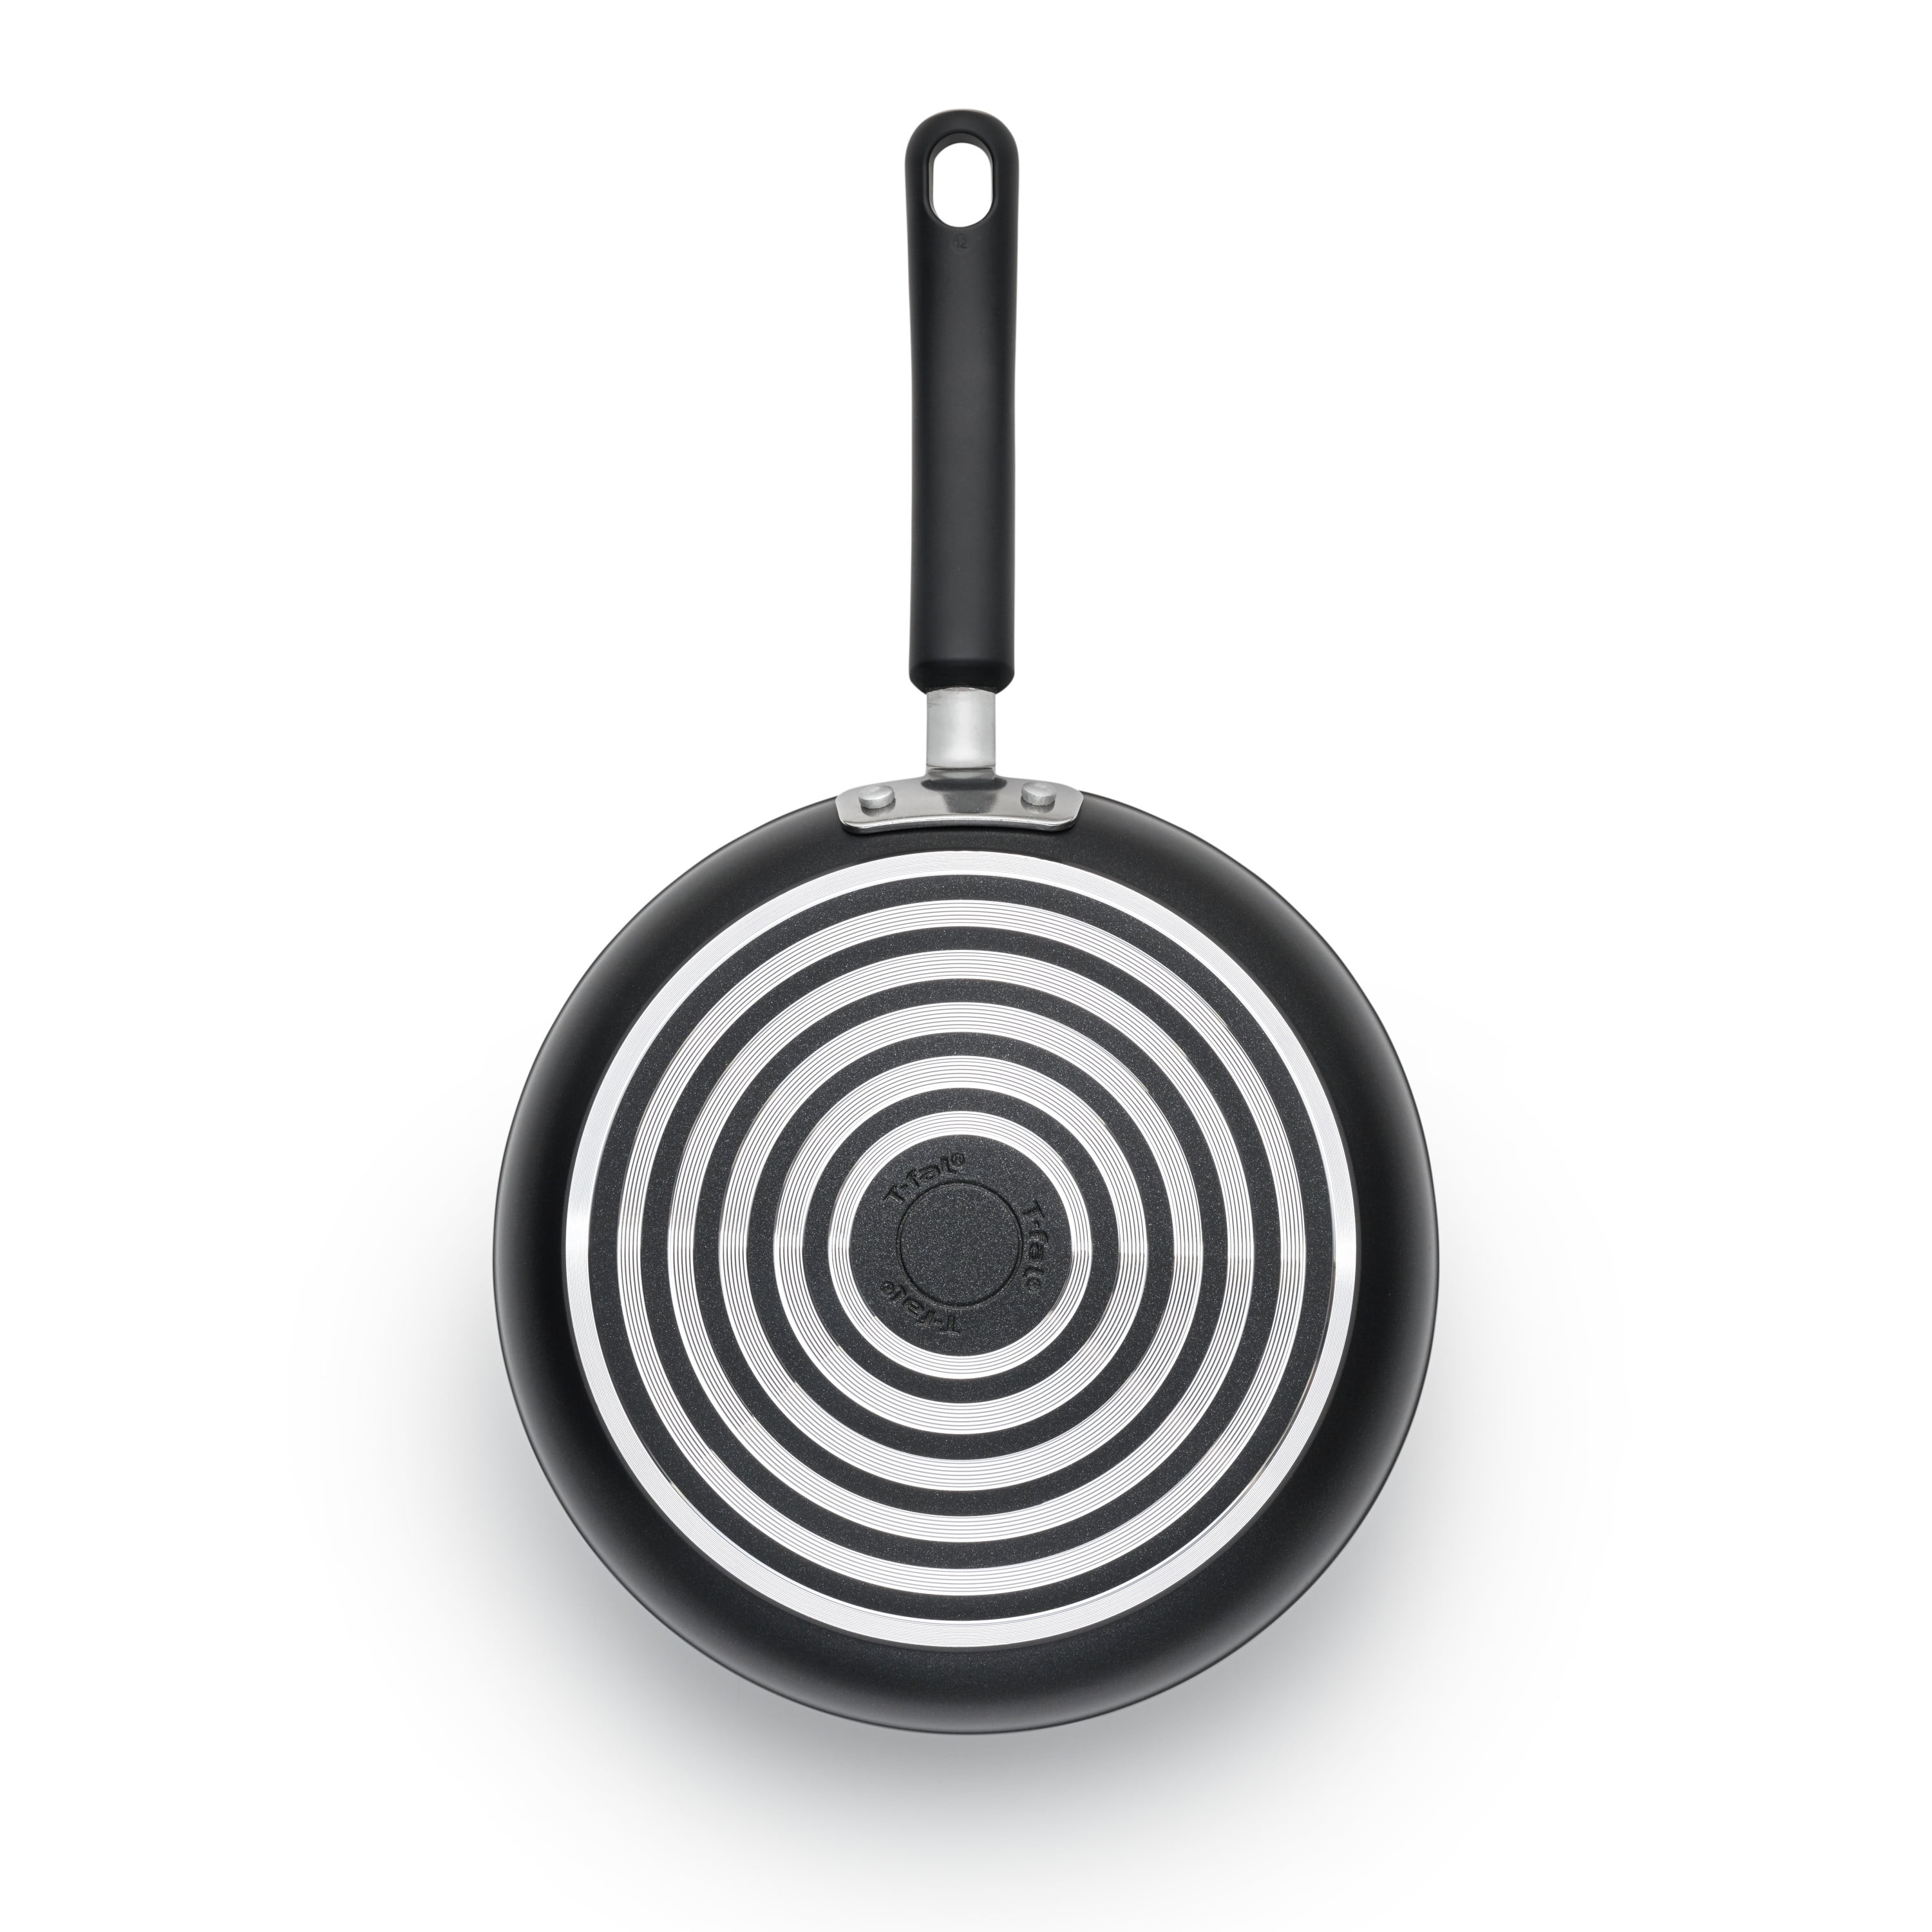 T-fal Titanium Forged Frying Pan - Black, 8 in - Kroger